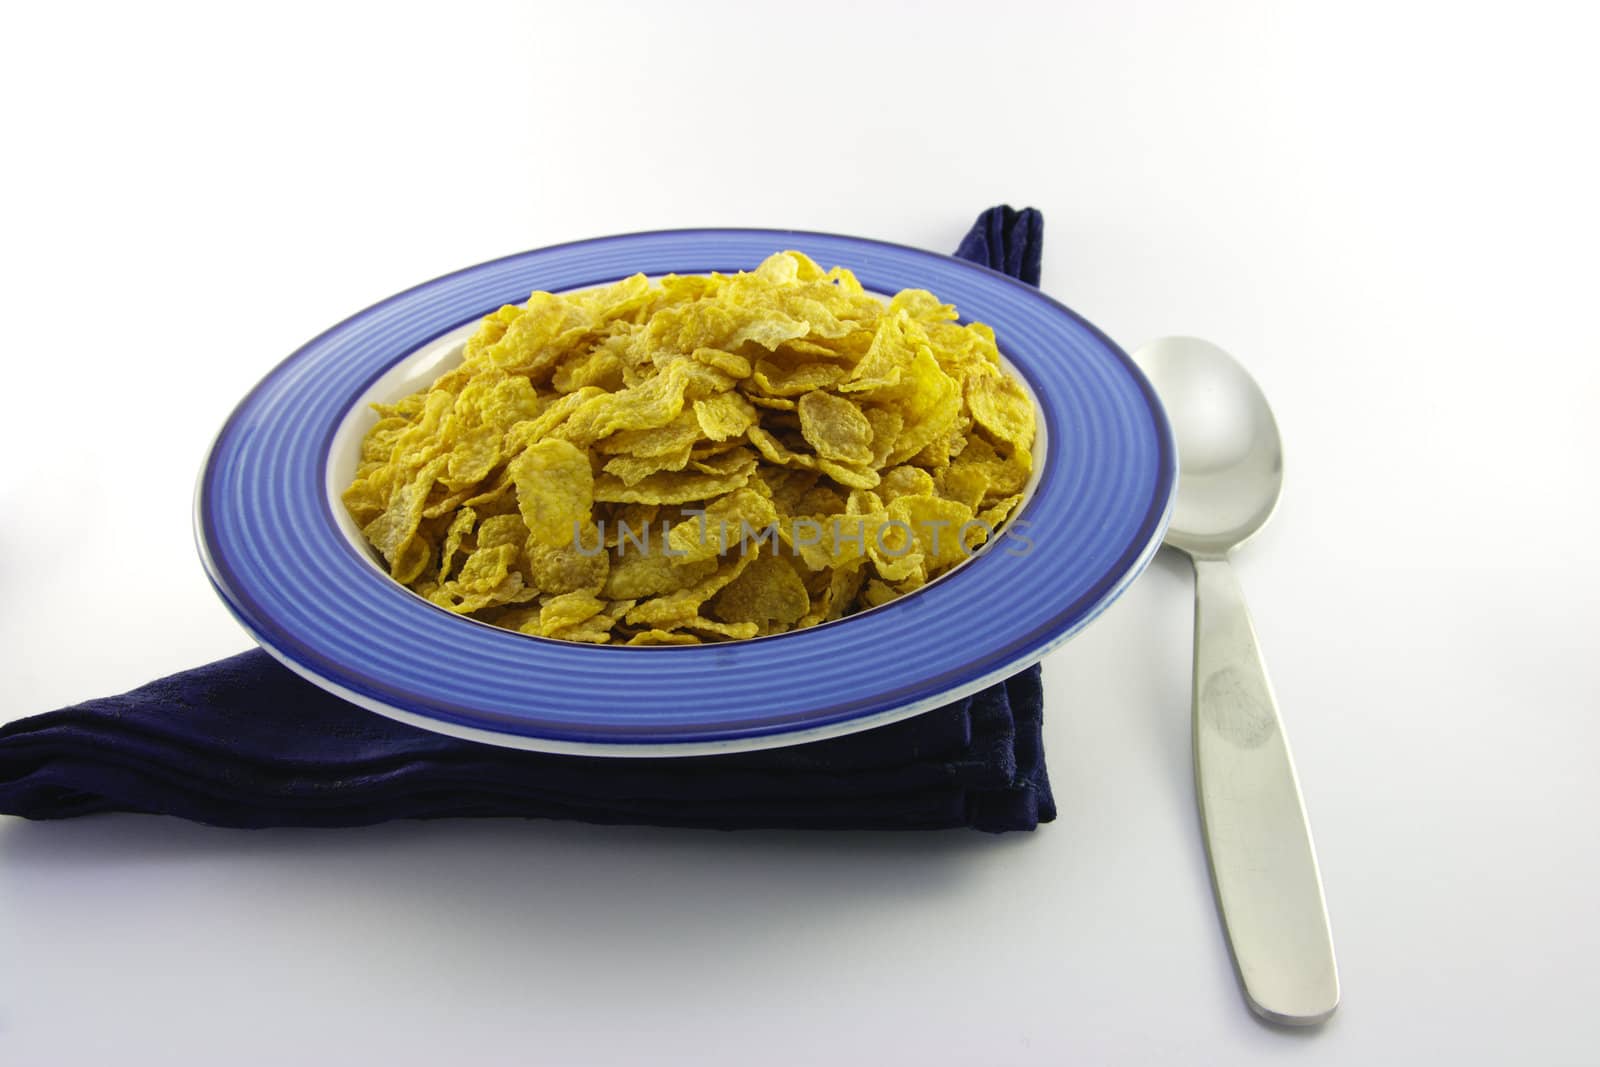 Cornflakes in a Blue Bowl with a Spoon by KeithWilson